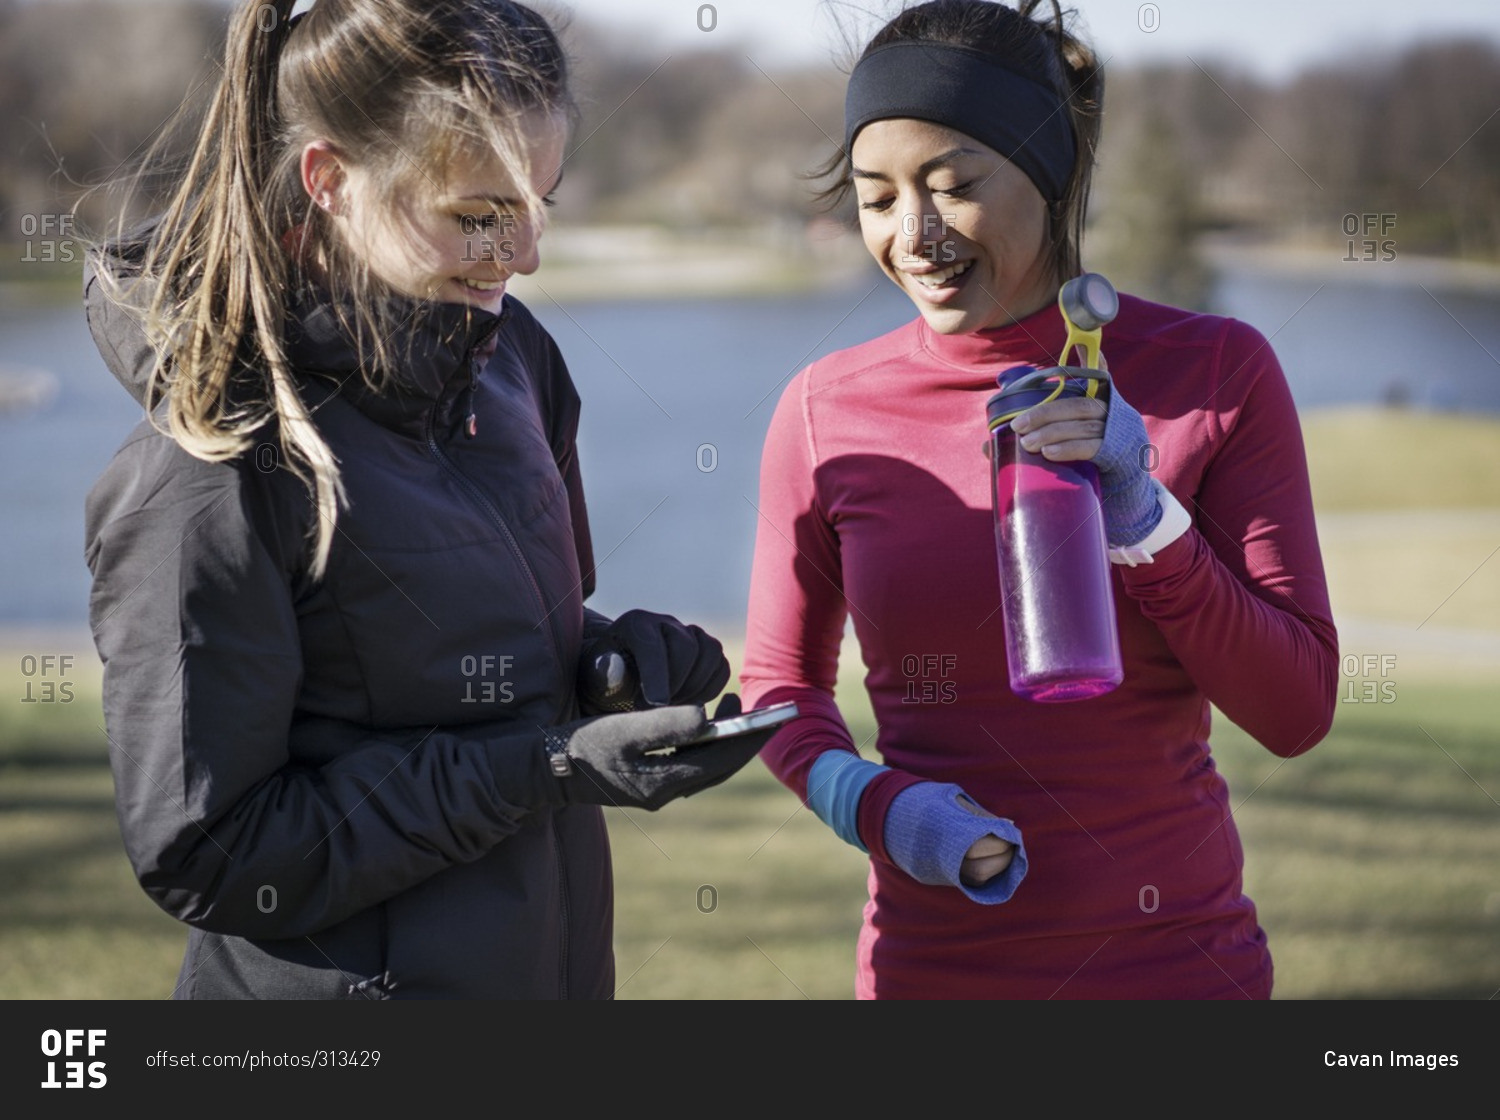 Two women in workout gear looking at smartphone together